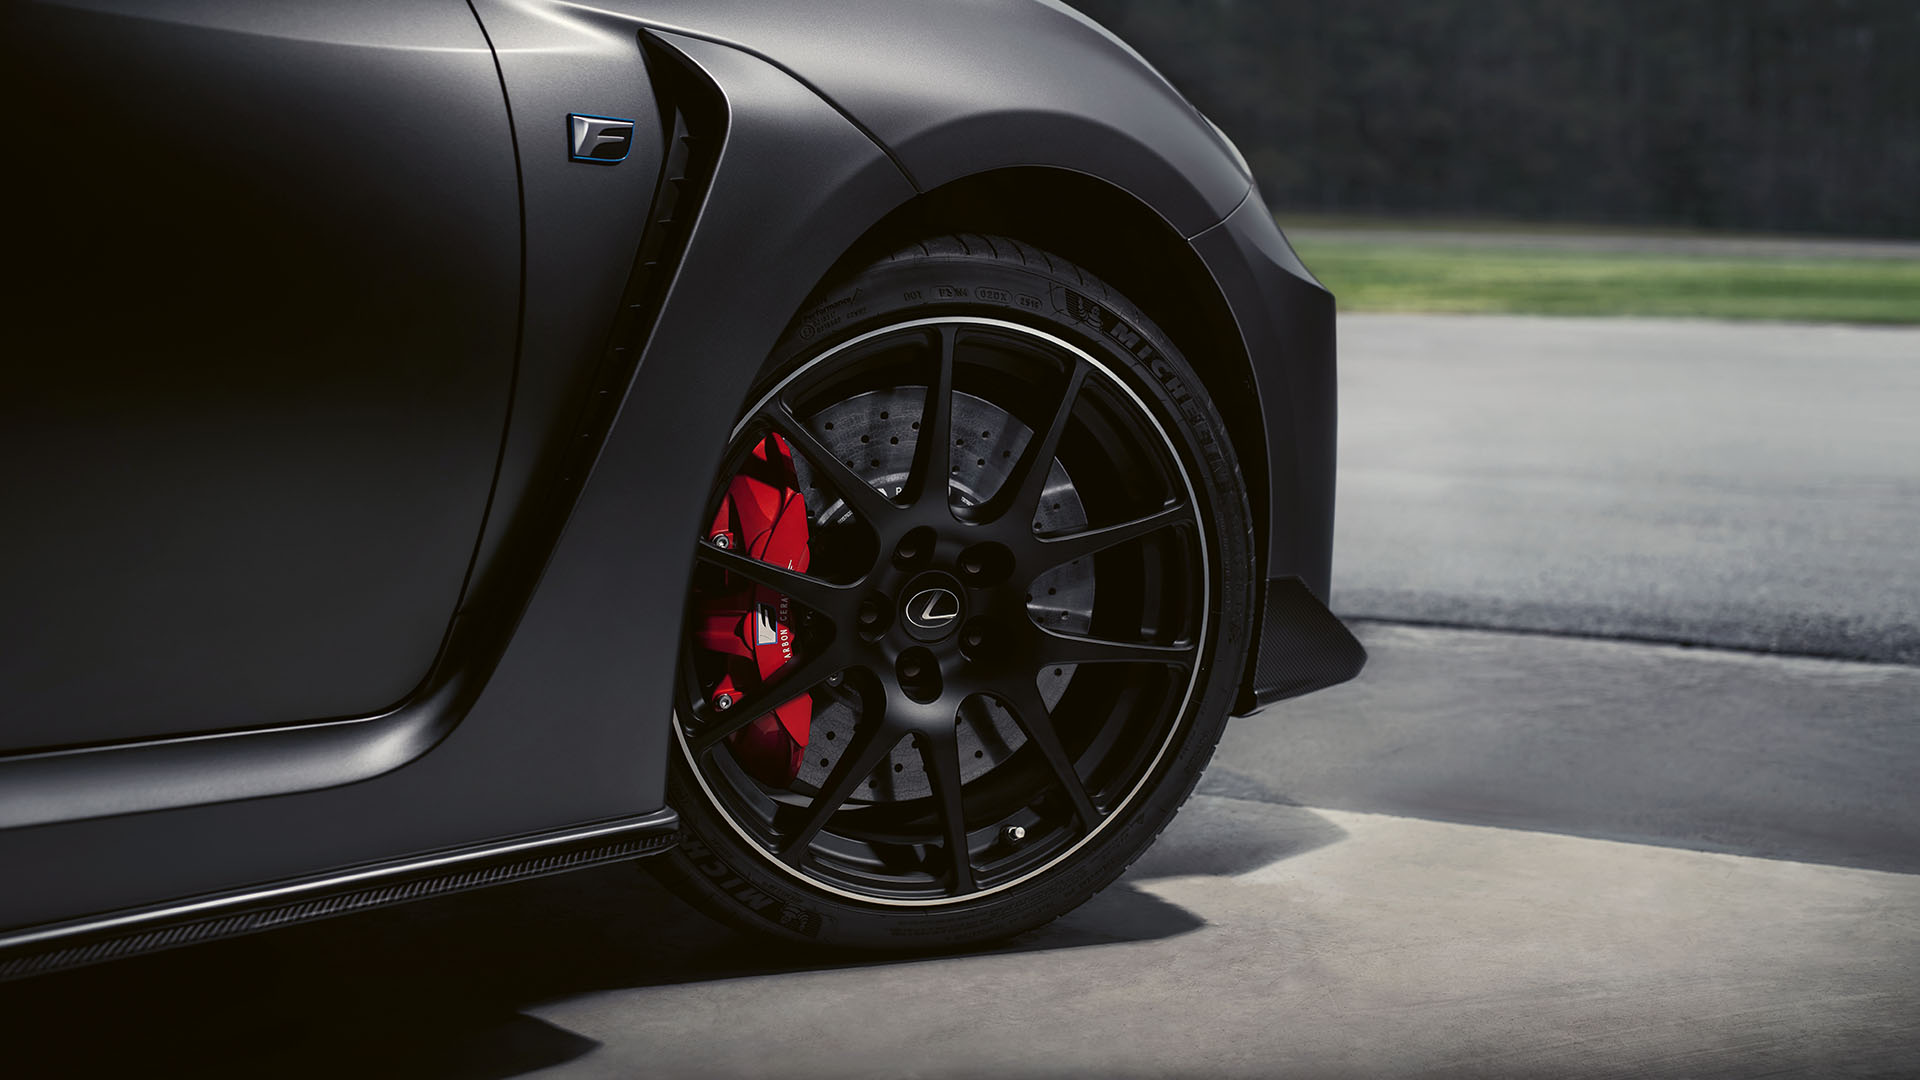 The RC F's 19" forged alloy wheel